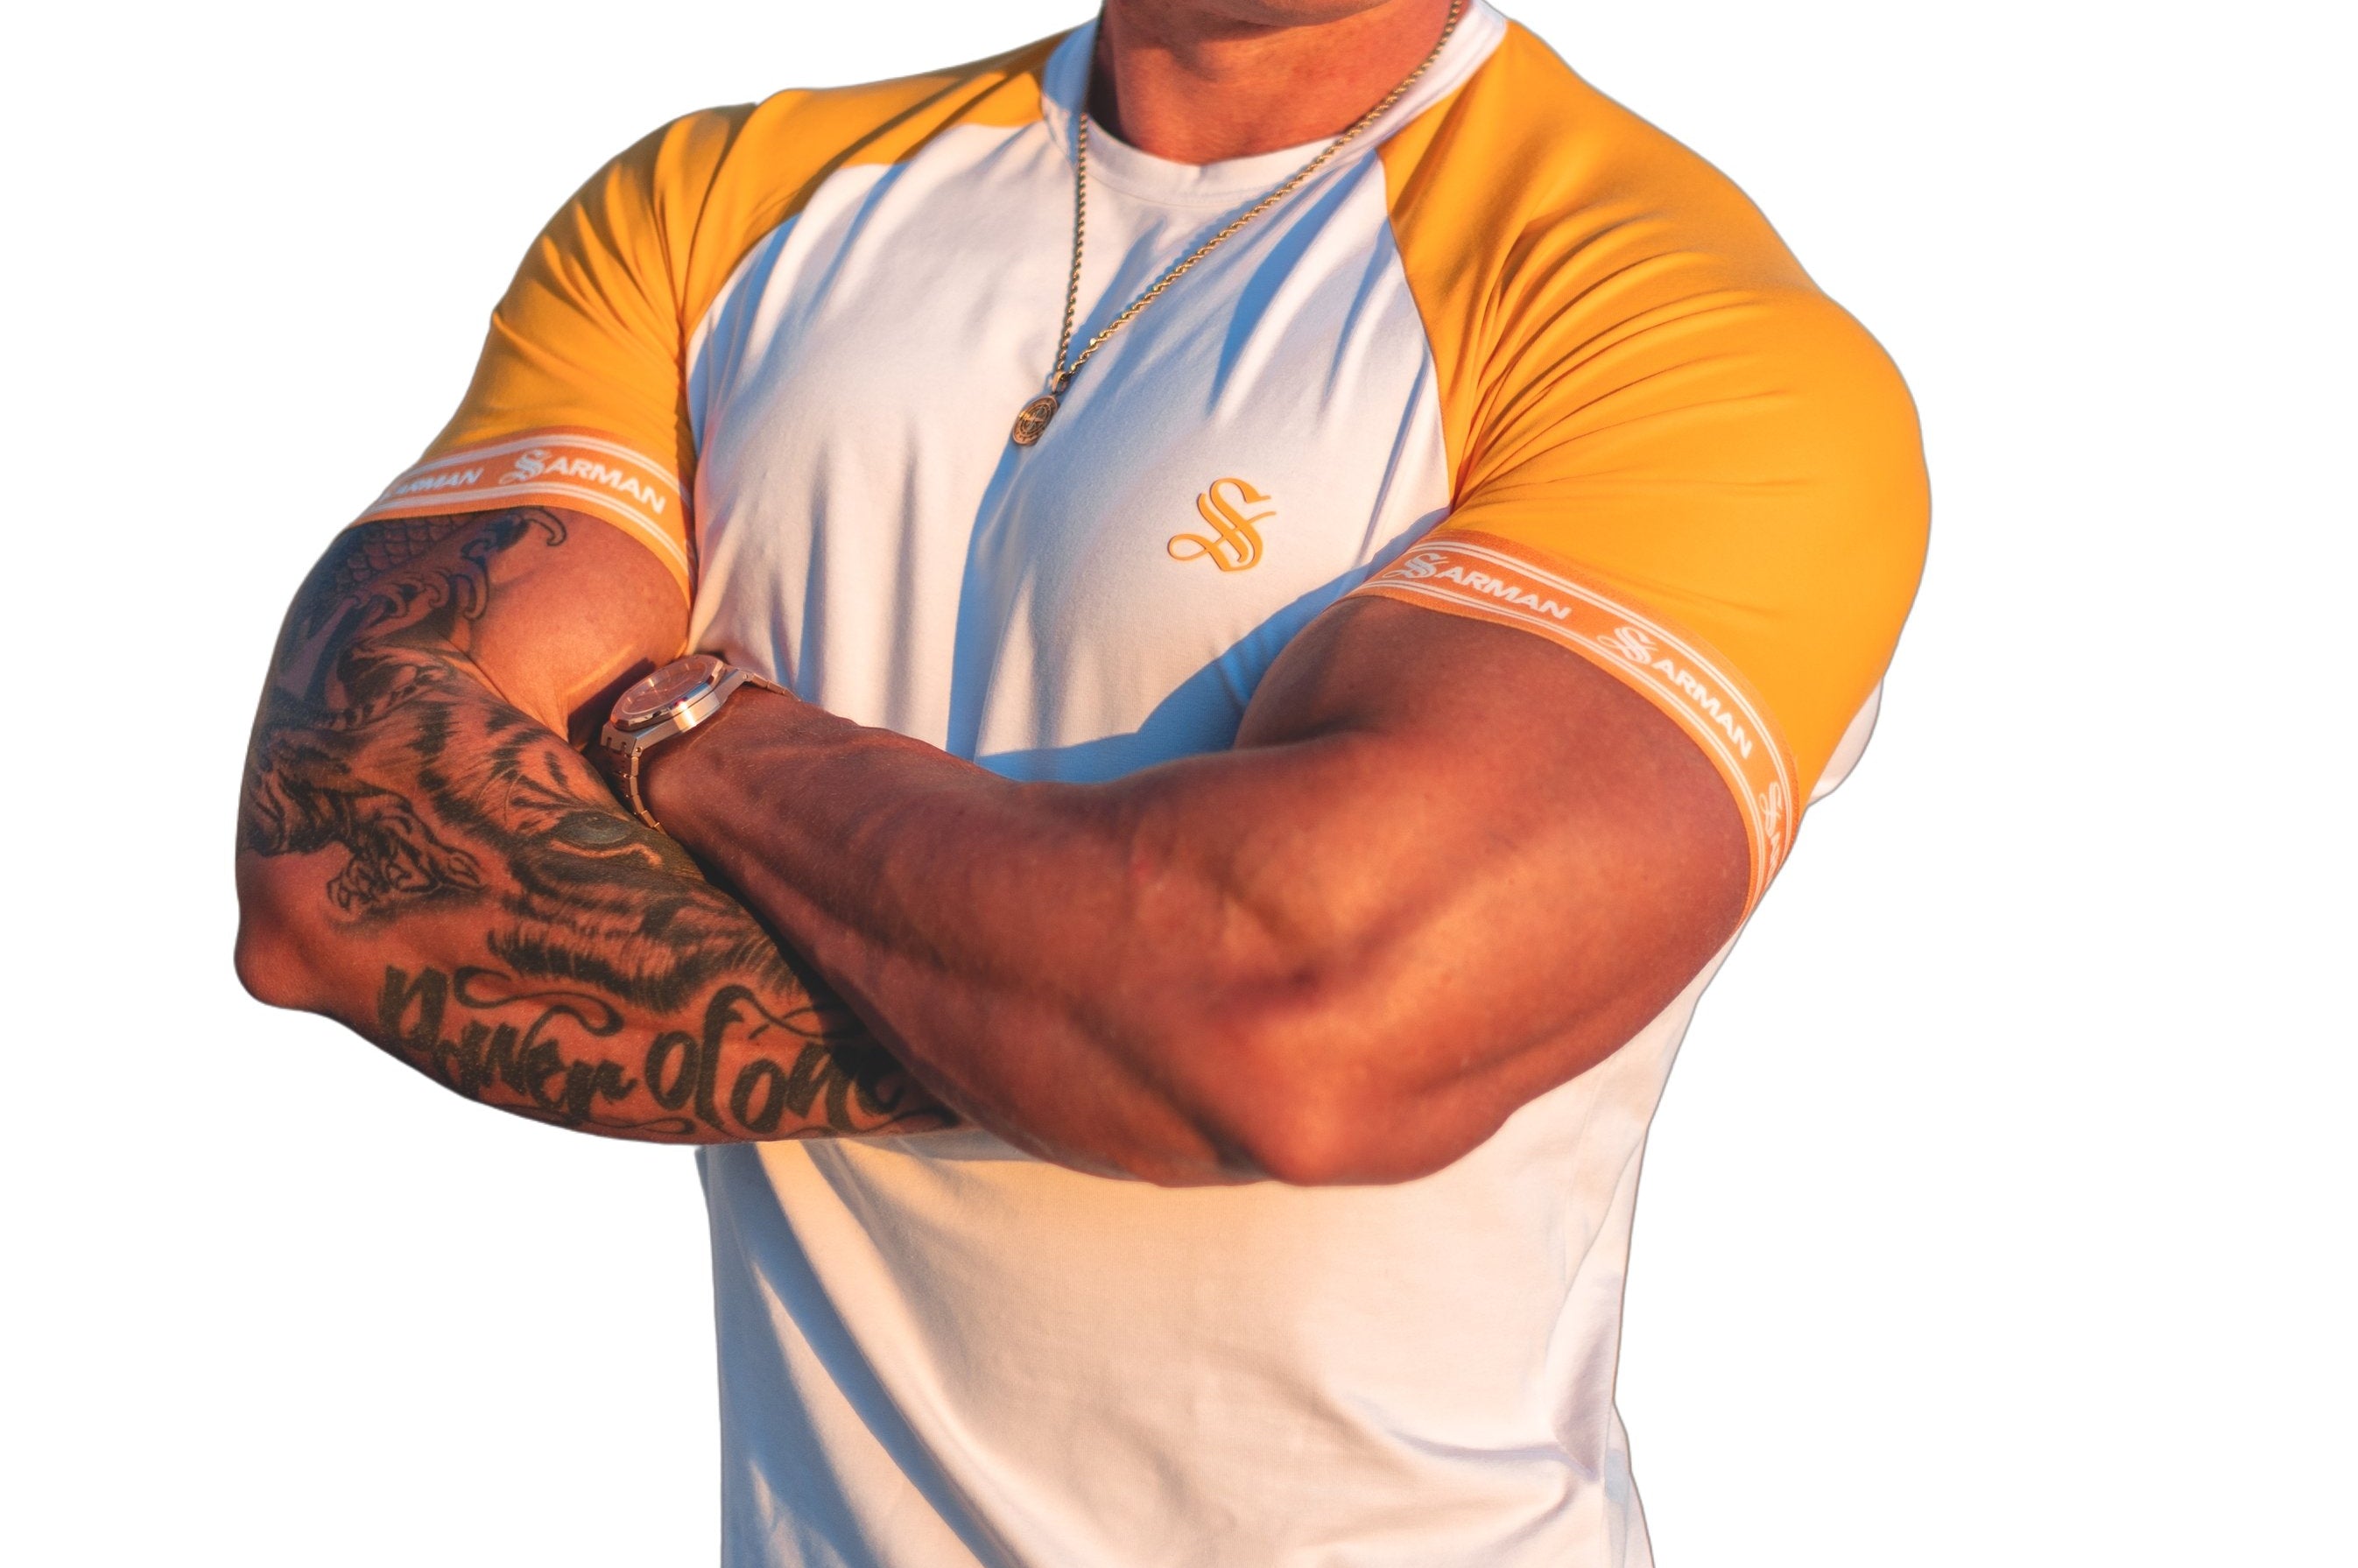 LifyLife - White/Yellow T- Shirt for Men - Sarman Fashion - Wholesale Clothing Fashion Brand for Men from Canada